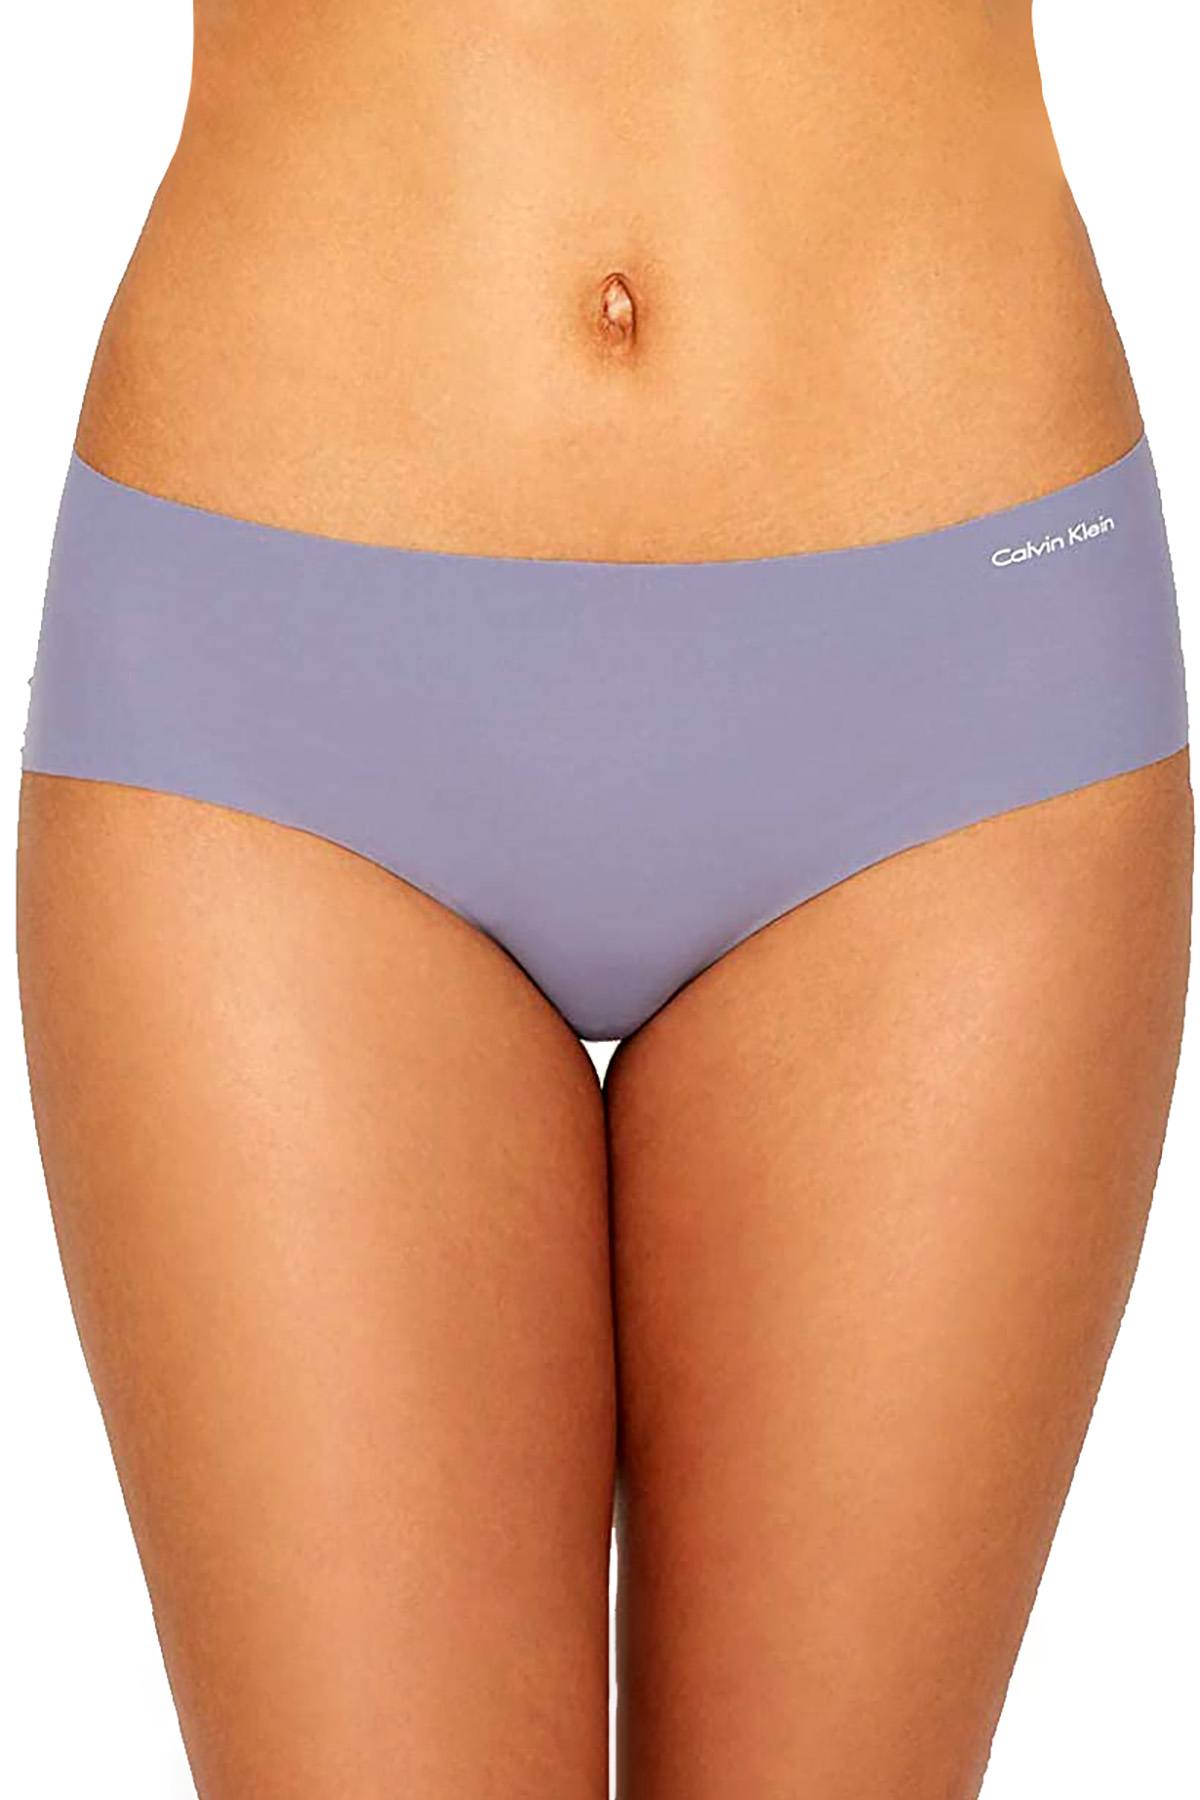 Calvin Klein Blue Granite Invisibles Hipster Panty